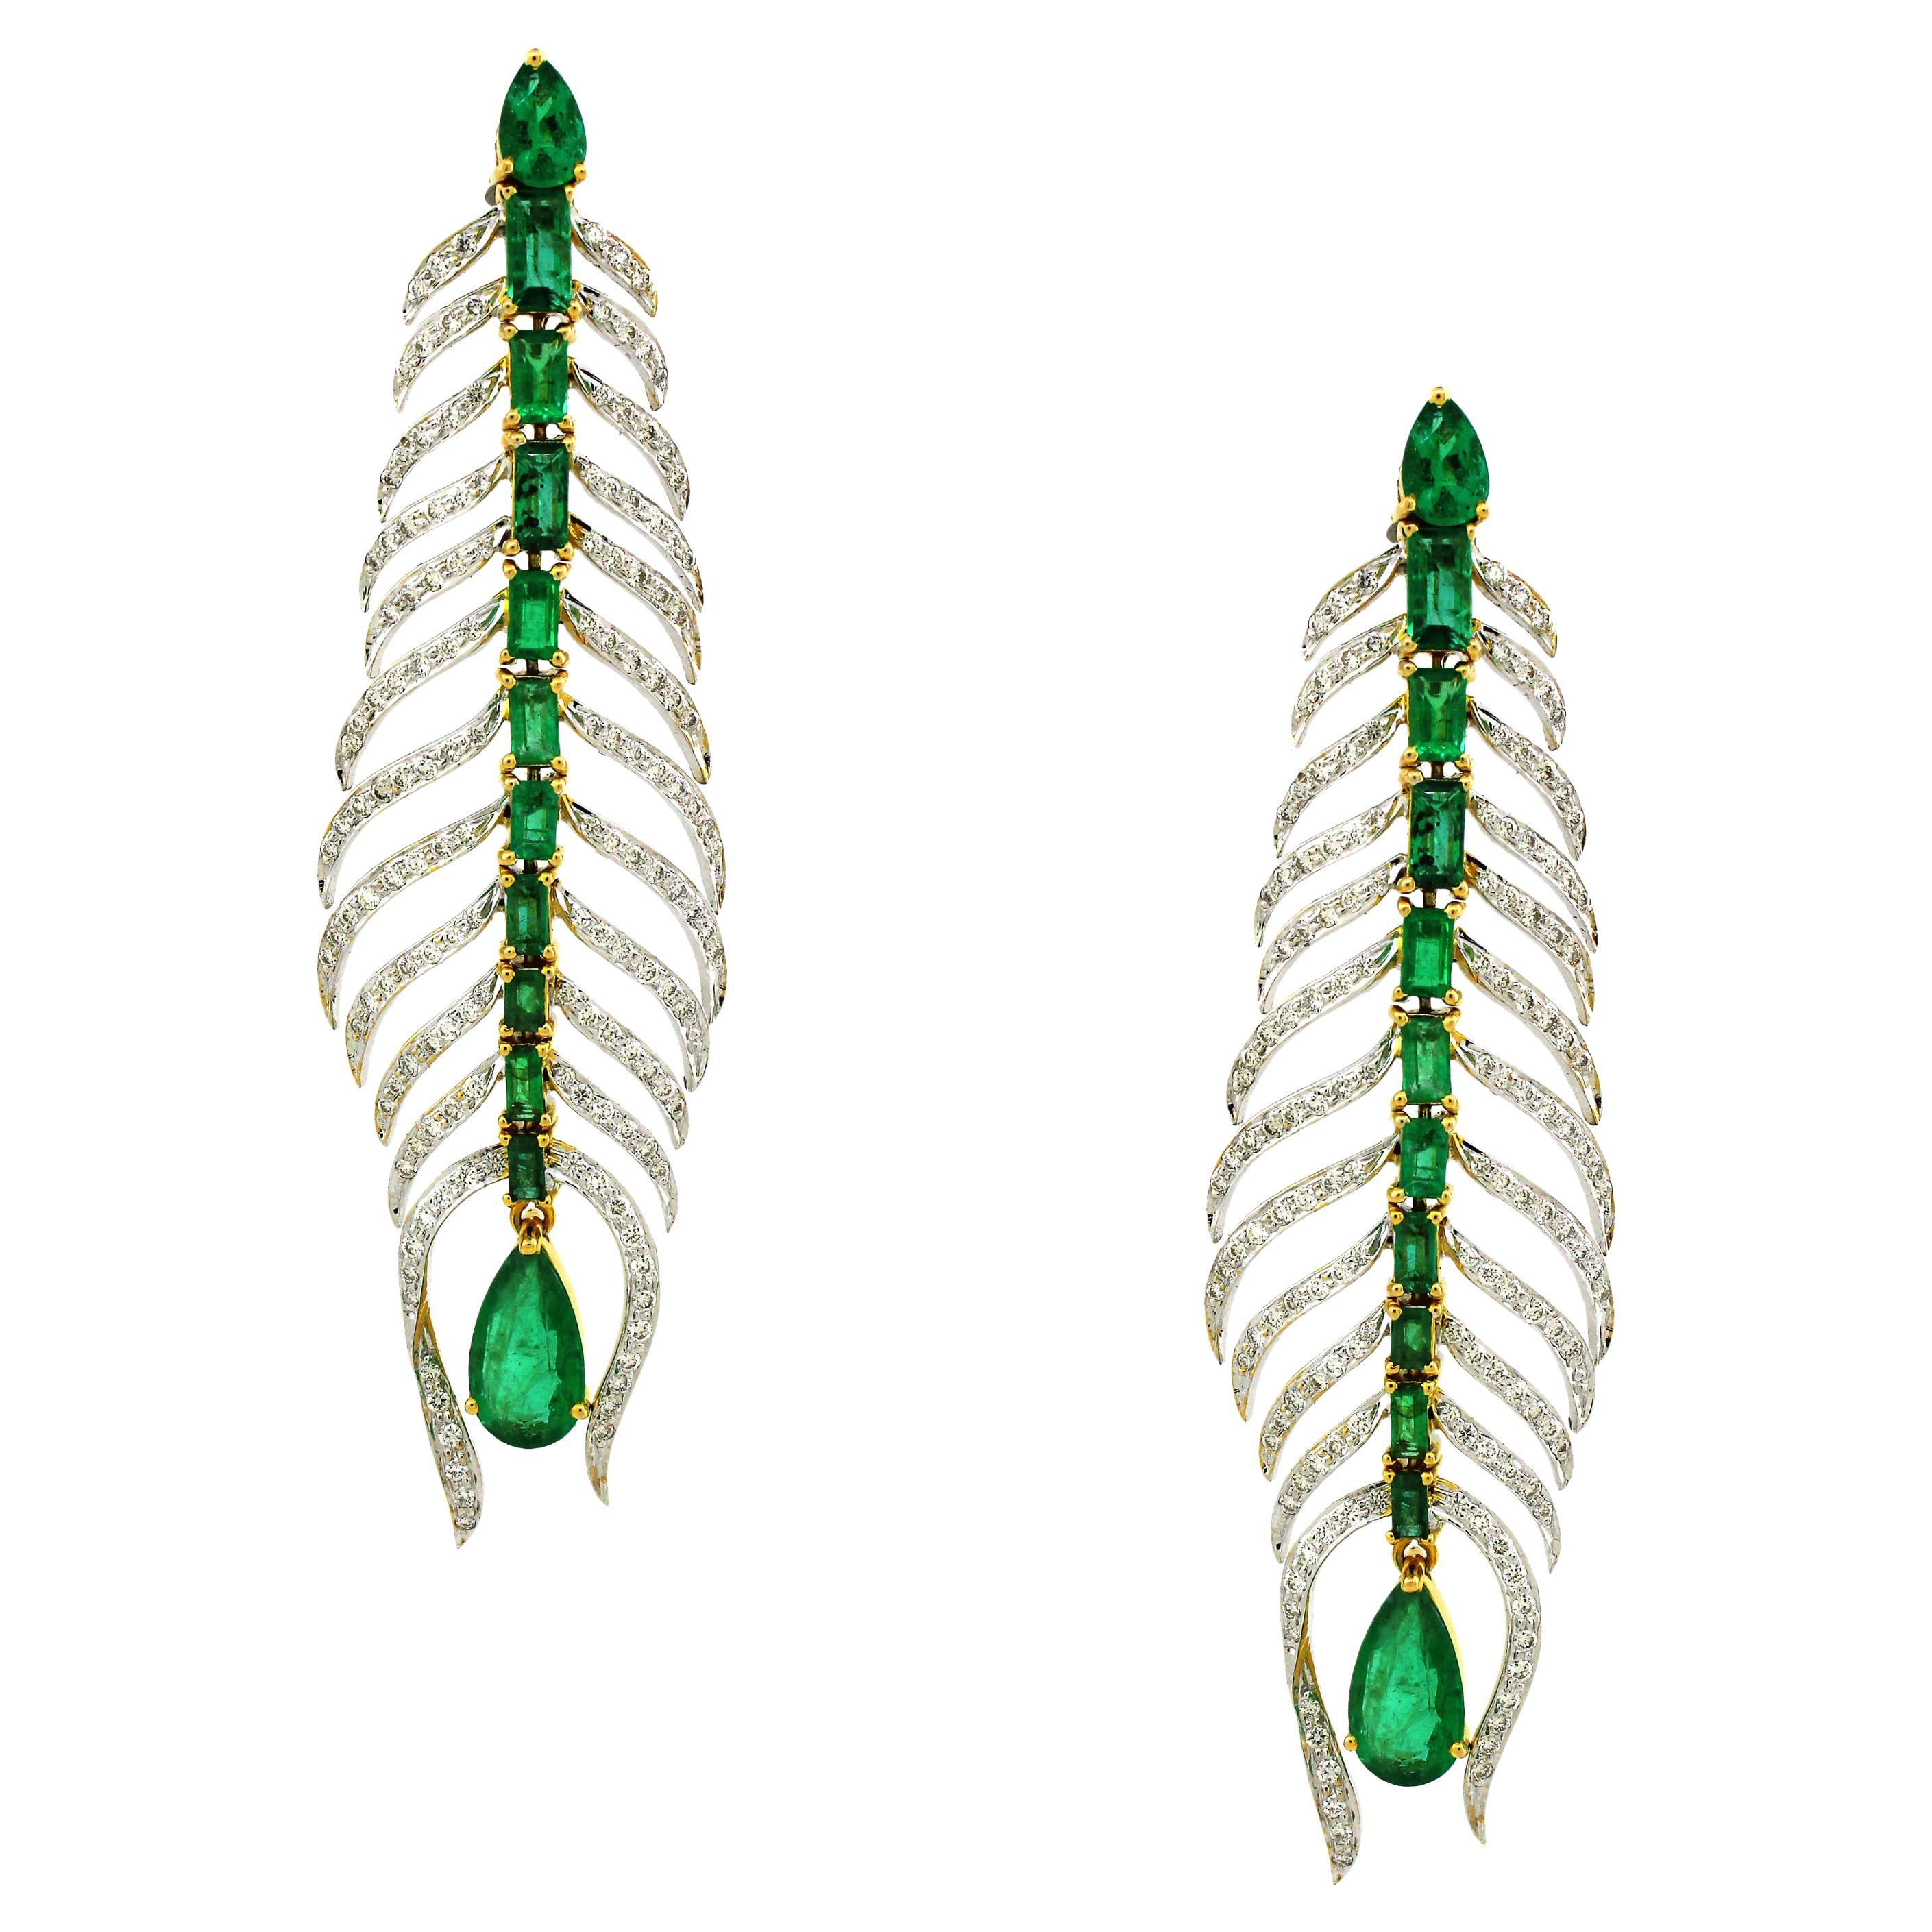 5.63 carats of Emerald Drop Earrings For Sale